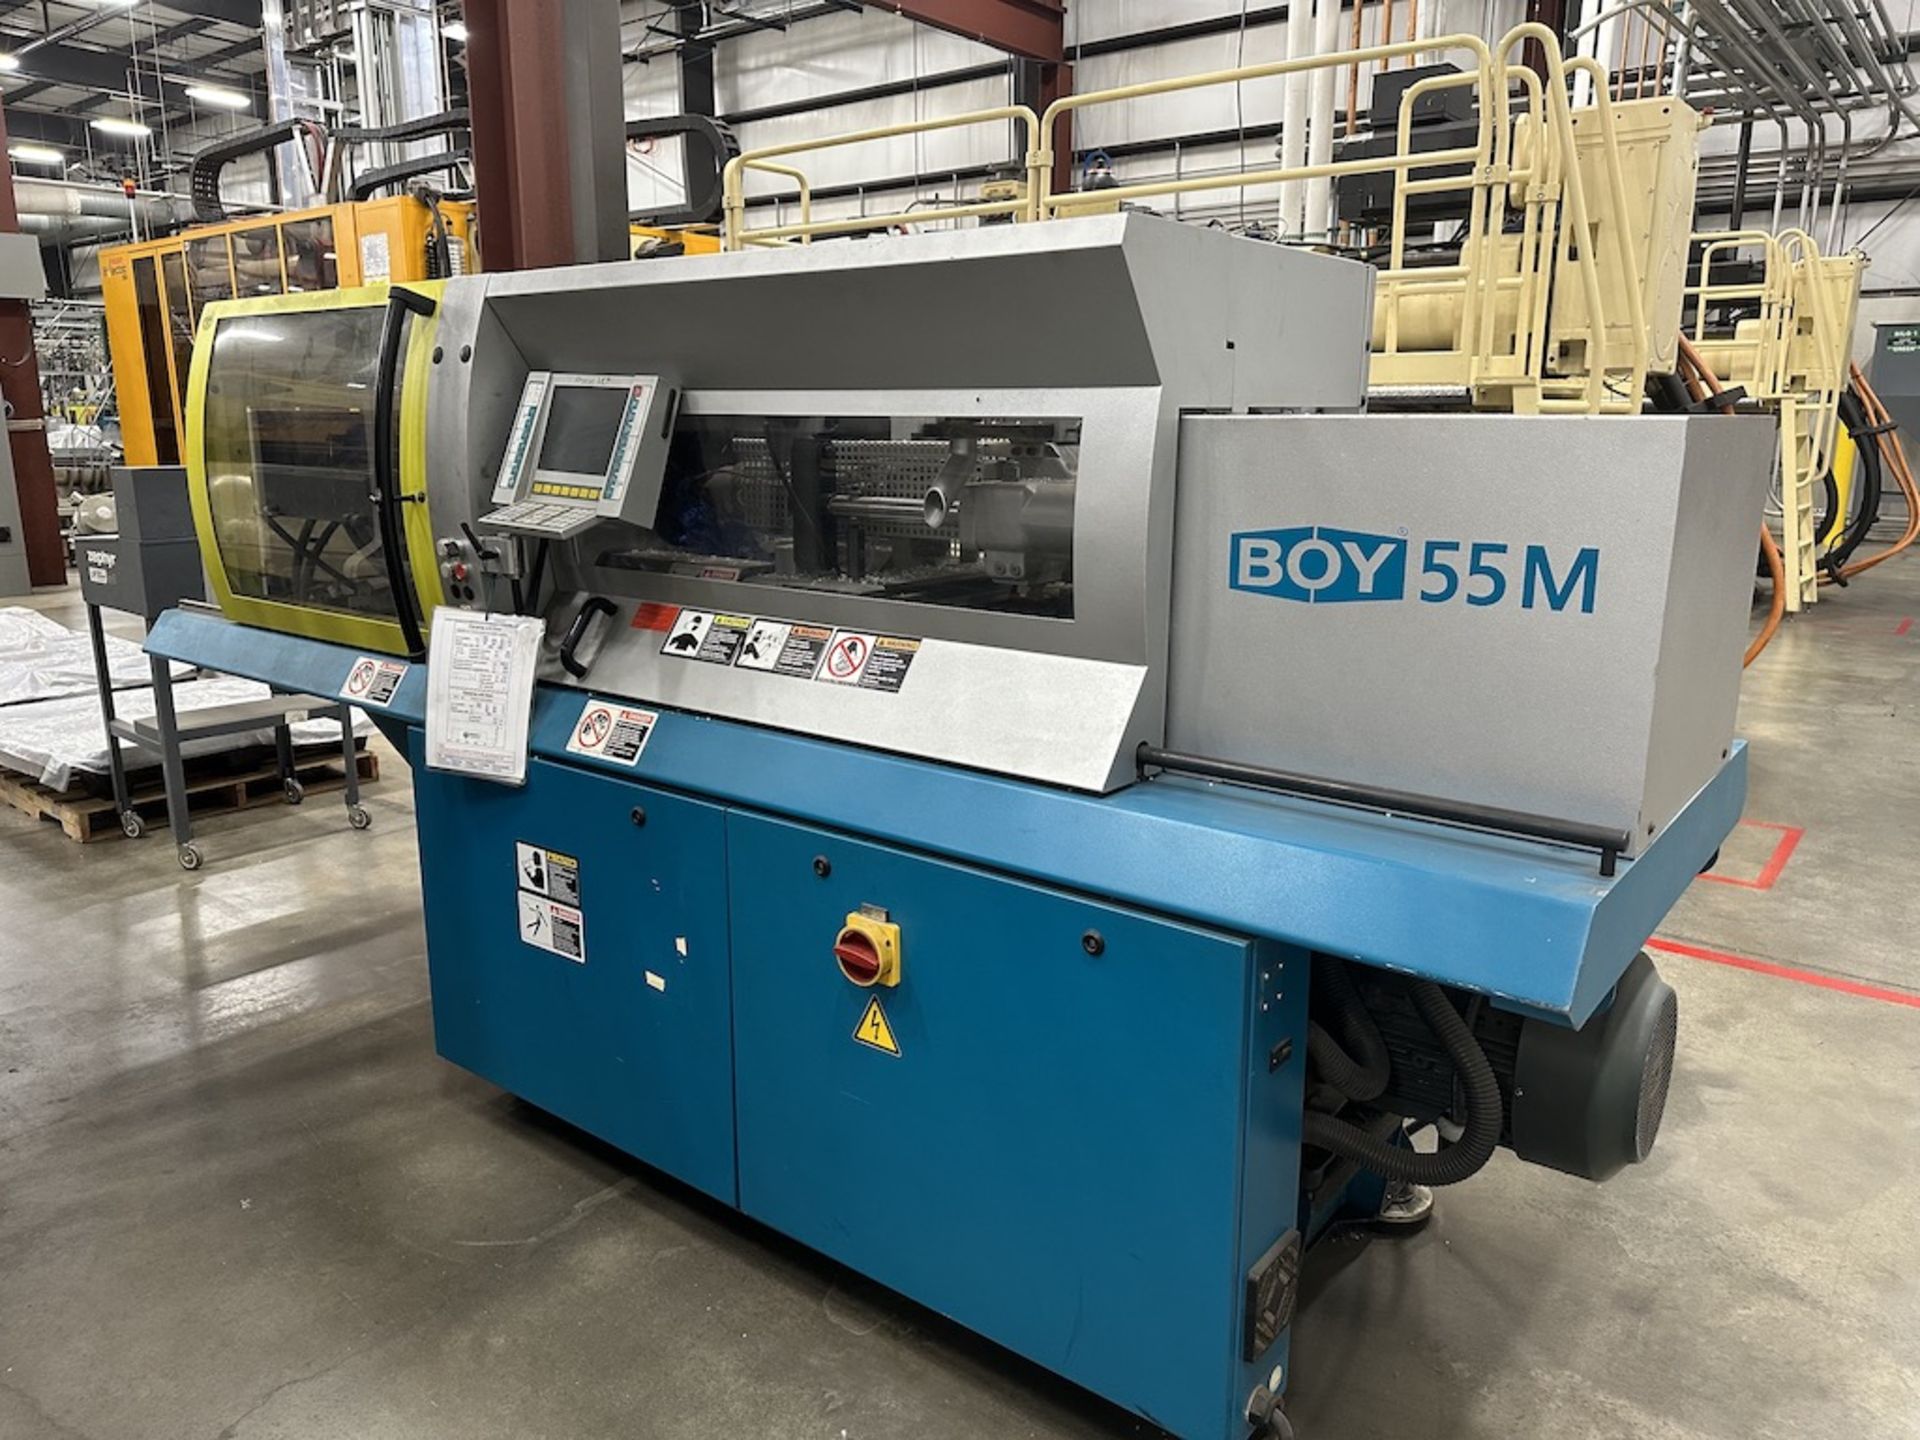 BOY 55M, 55 Ton Injection Molding Press, New in 2008